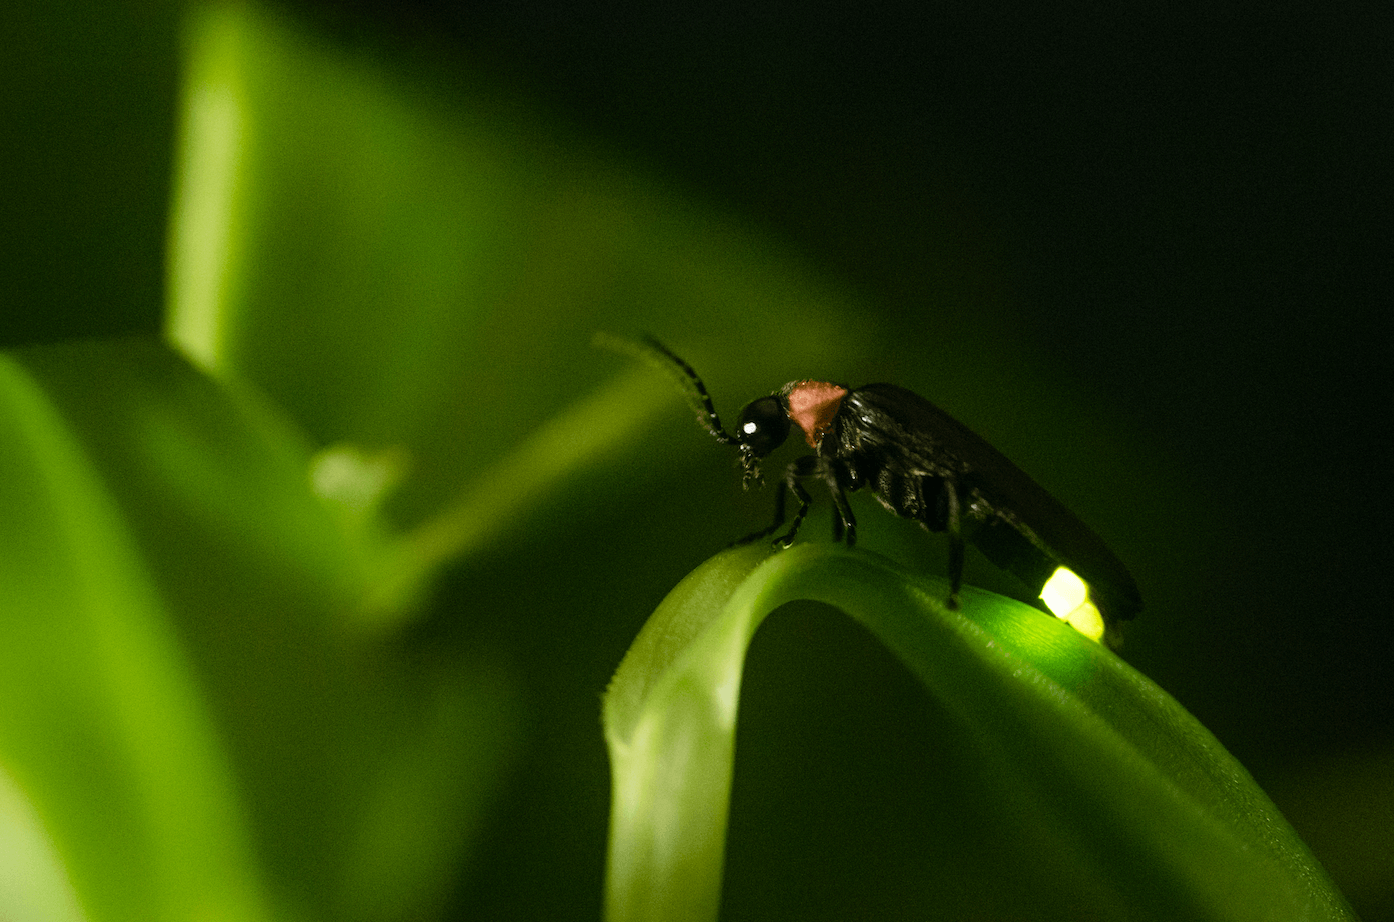 Best Place to See Synchronous Fireflies - Bug